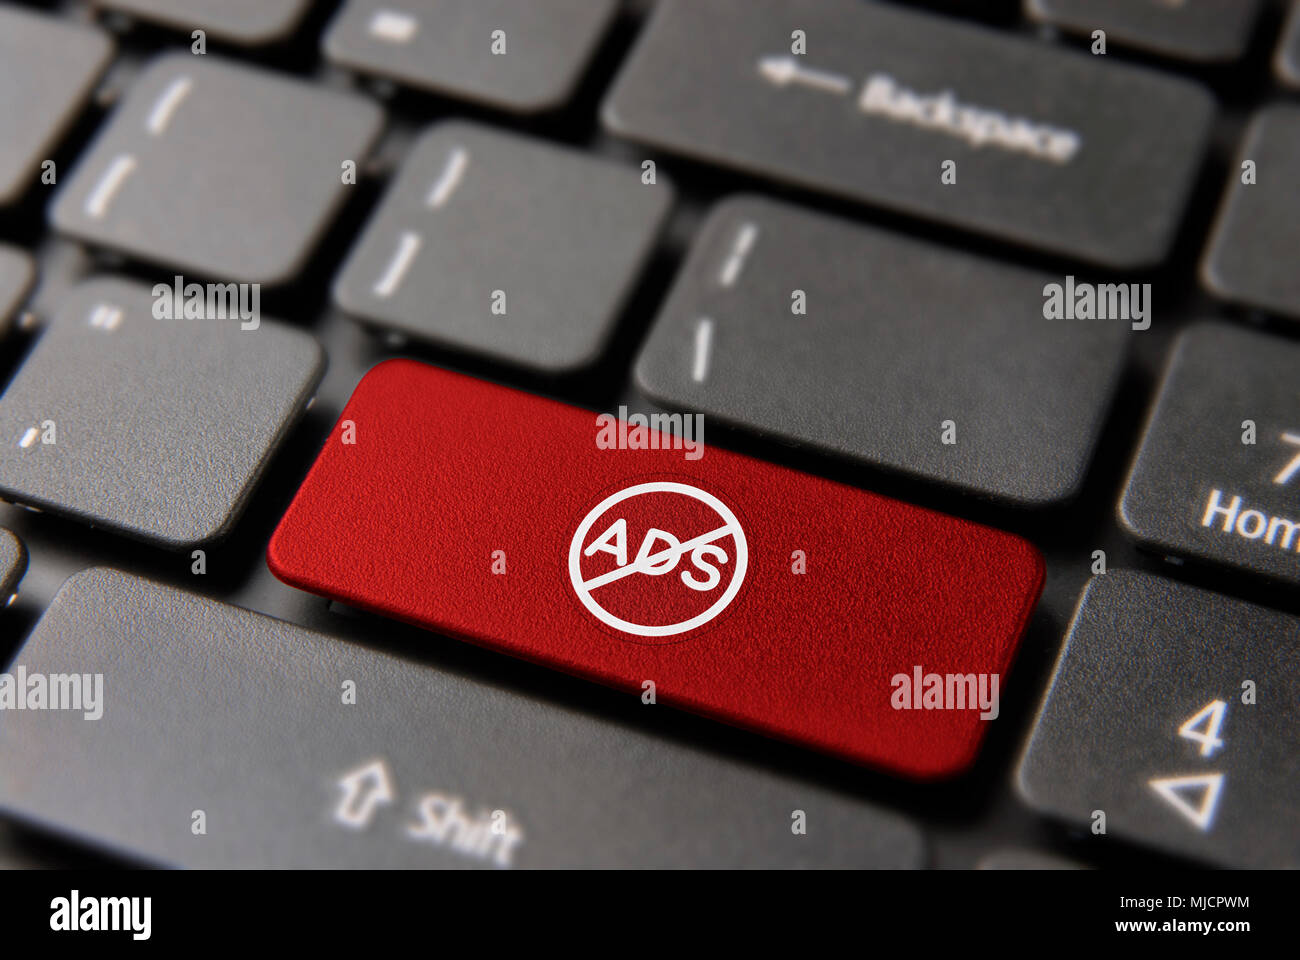 Advertisement blocker security computer button for internet safety concept. Anti ads icon key in red color. Stock Photo